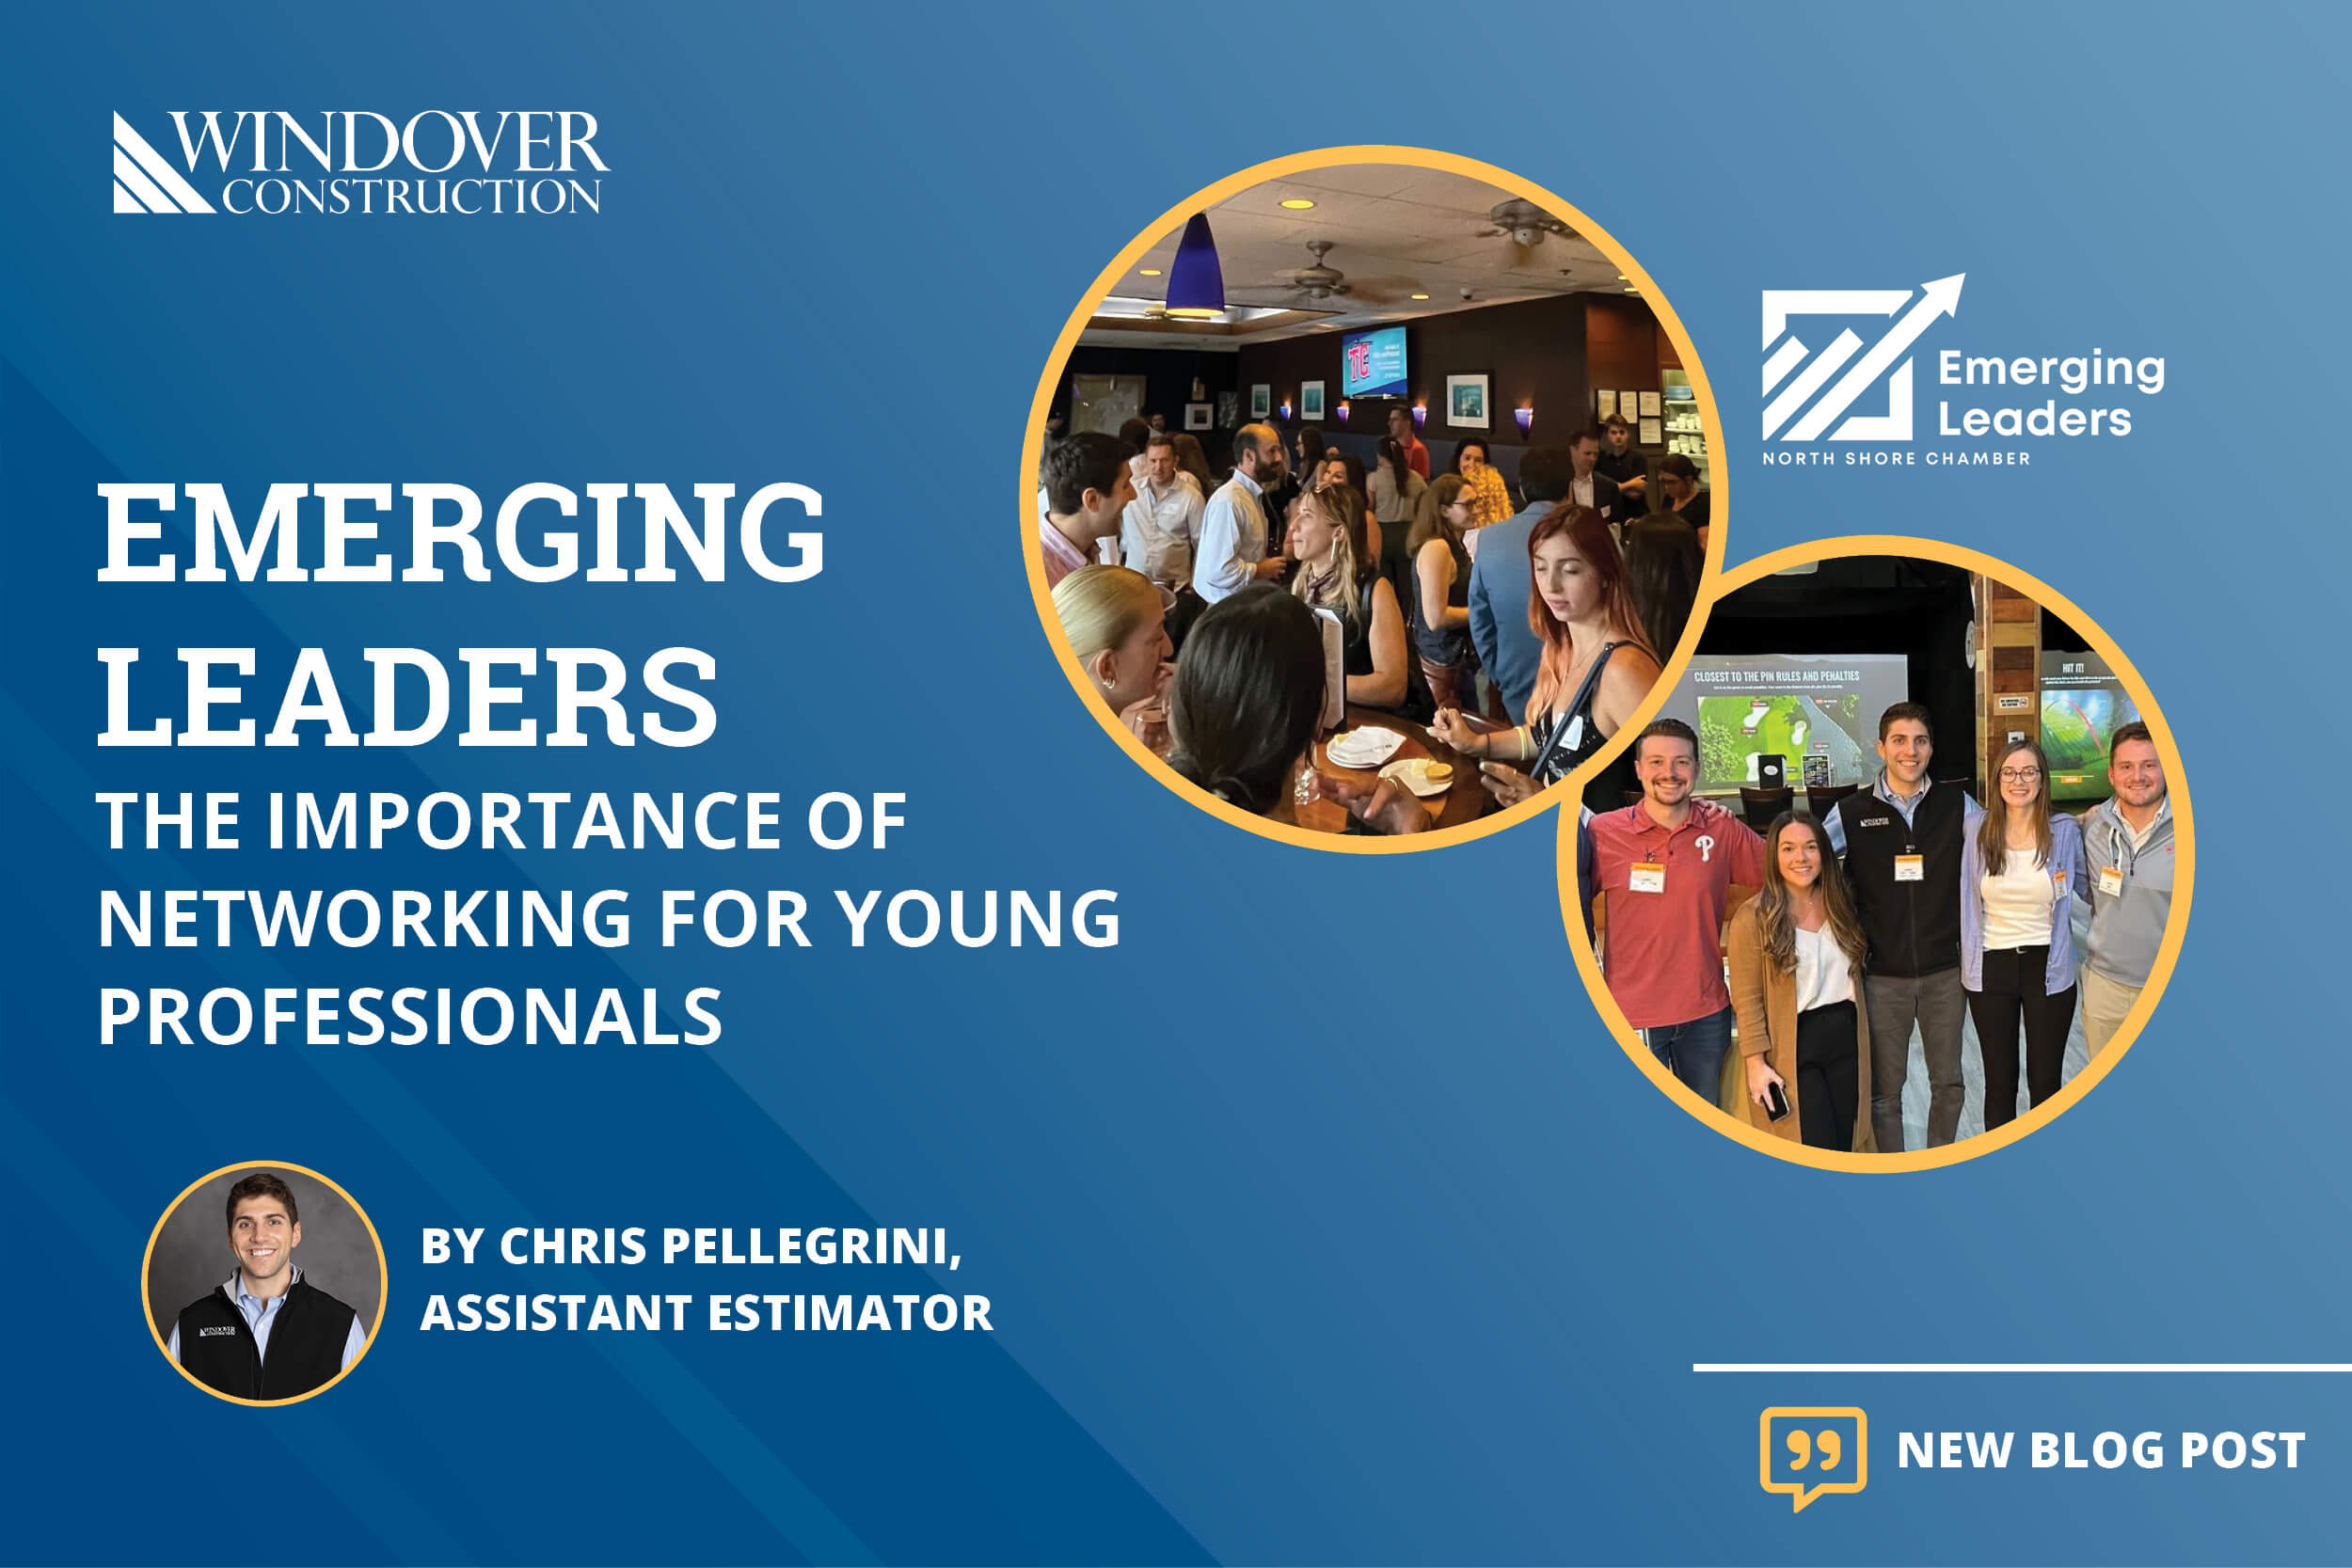 Emerging Leaders: The Importance of Networking for Young Professionals